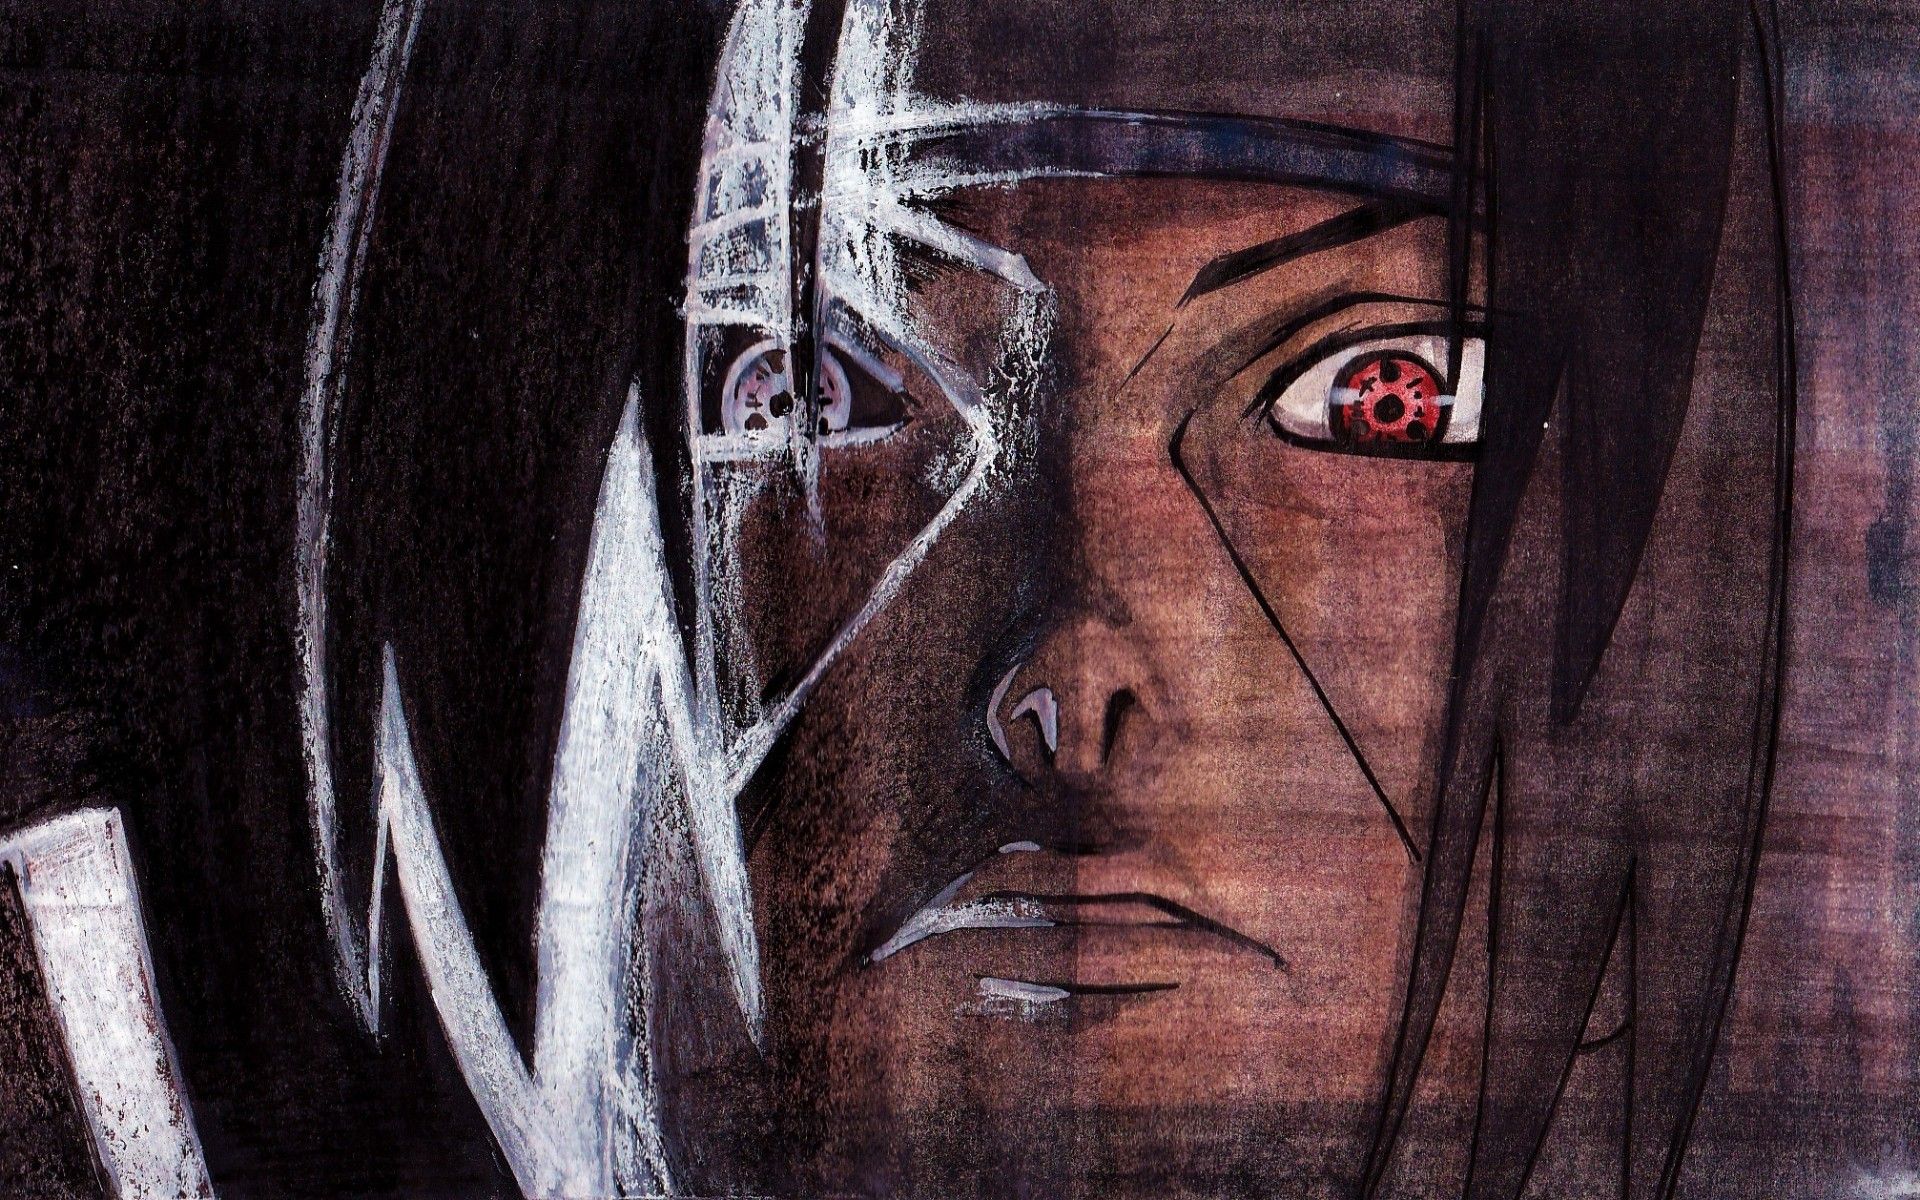 Itachi 4K wallpaper for your desktop or mobile screen free and easy to download